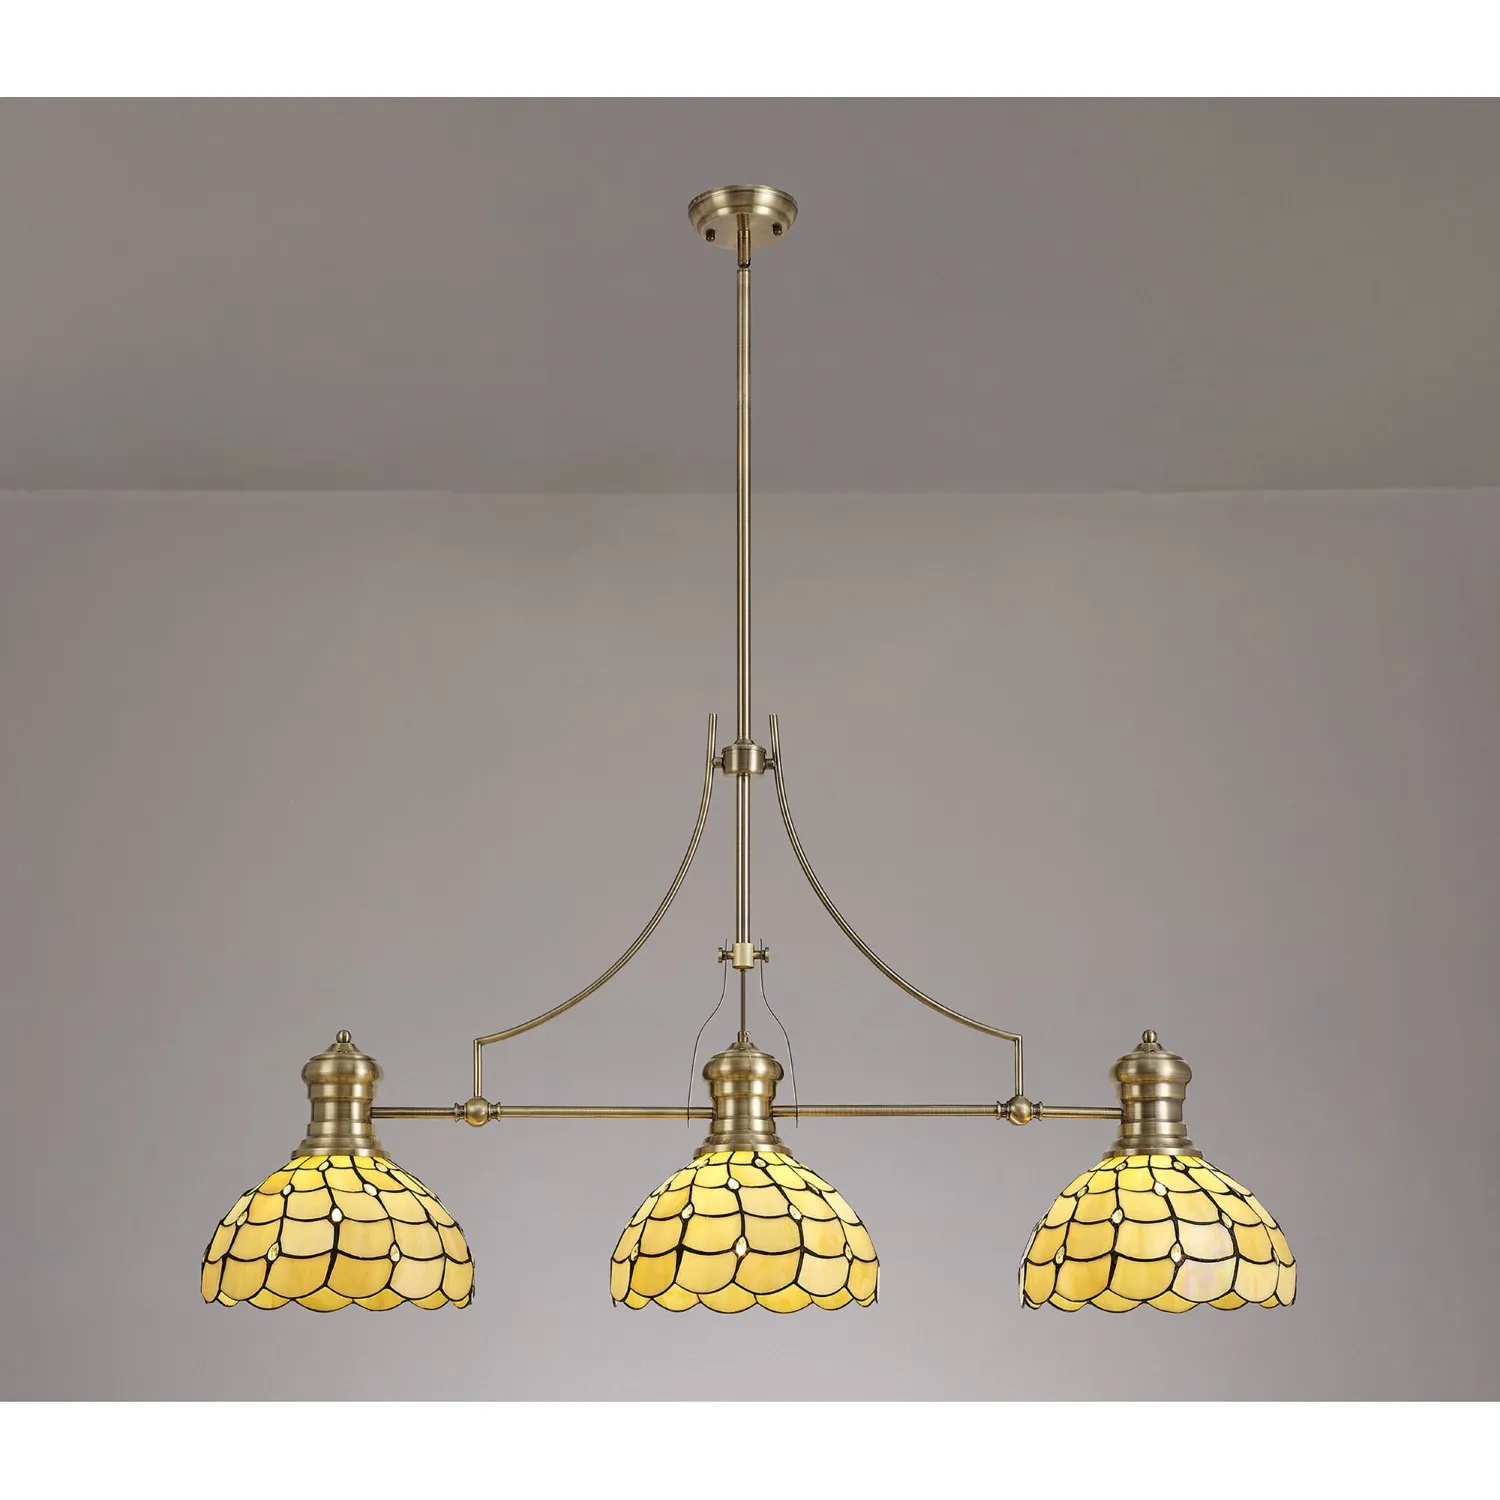 Stratford 3 Light Linear Pendant E27 With 30cm Tiffany Shade, Antique Brass, Beige, Clear Crystal